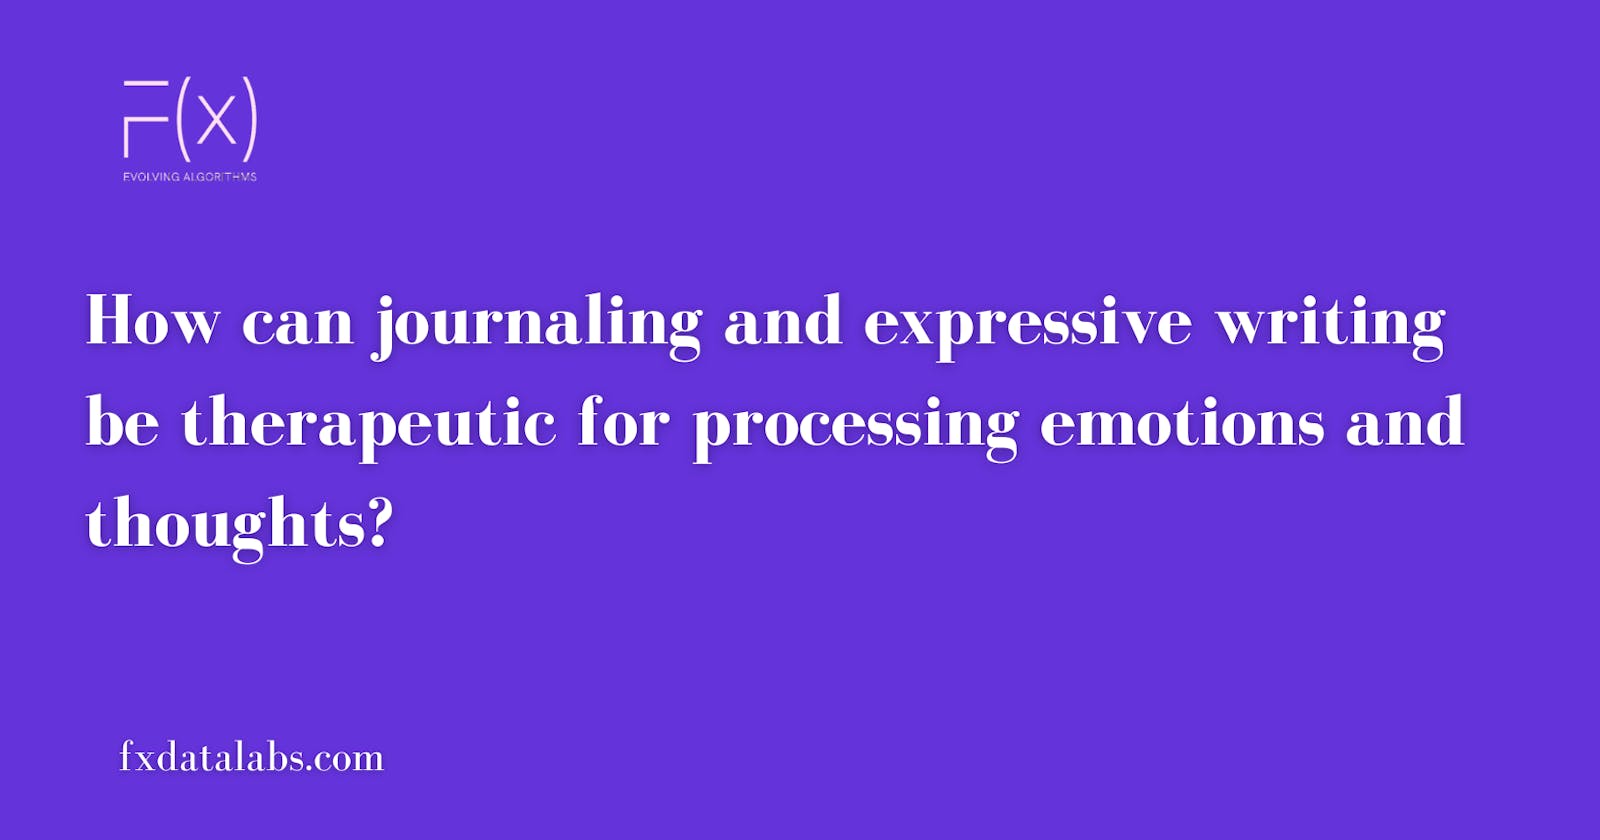 How can  journaling and expressive writing be therapeutic for processing emotions and thoughts?